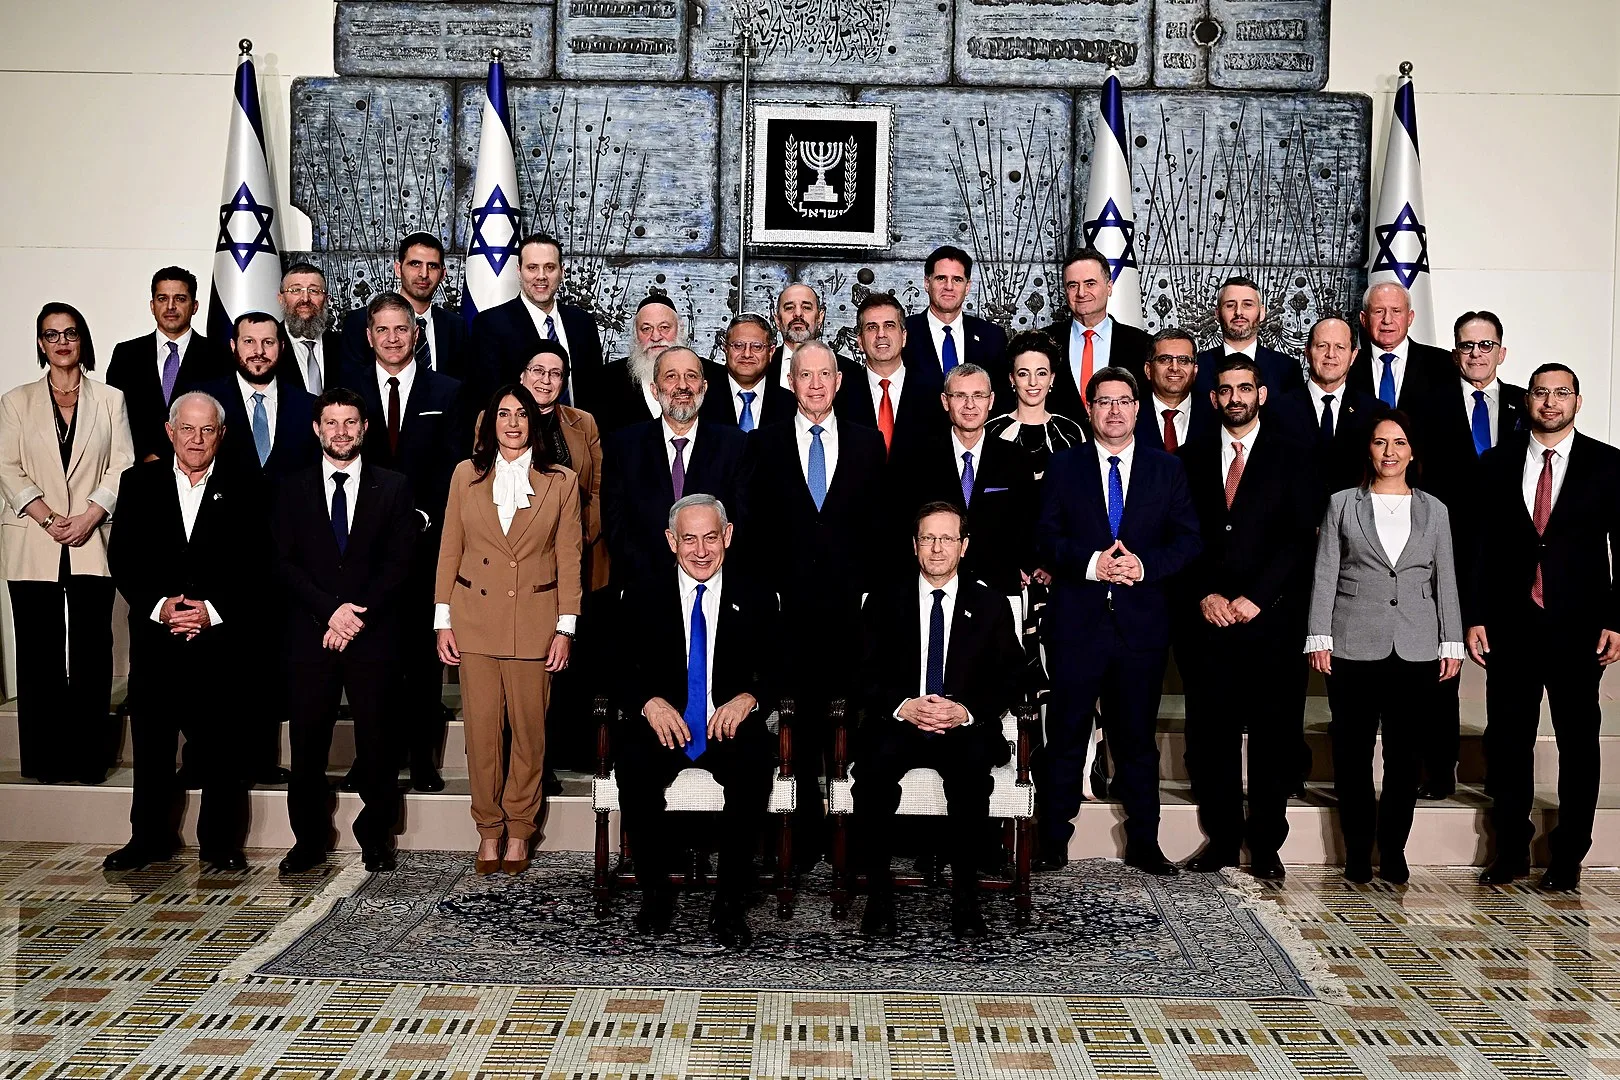 A group photo of the 37th government of Israel with President Isaac Herzog